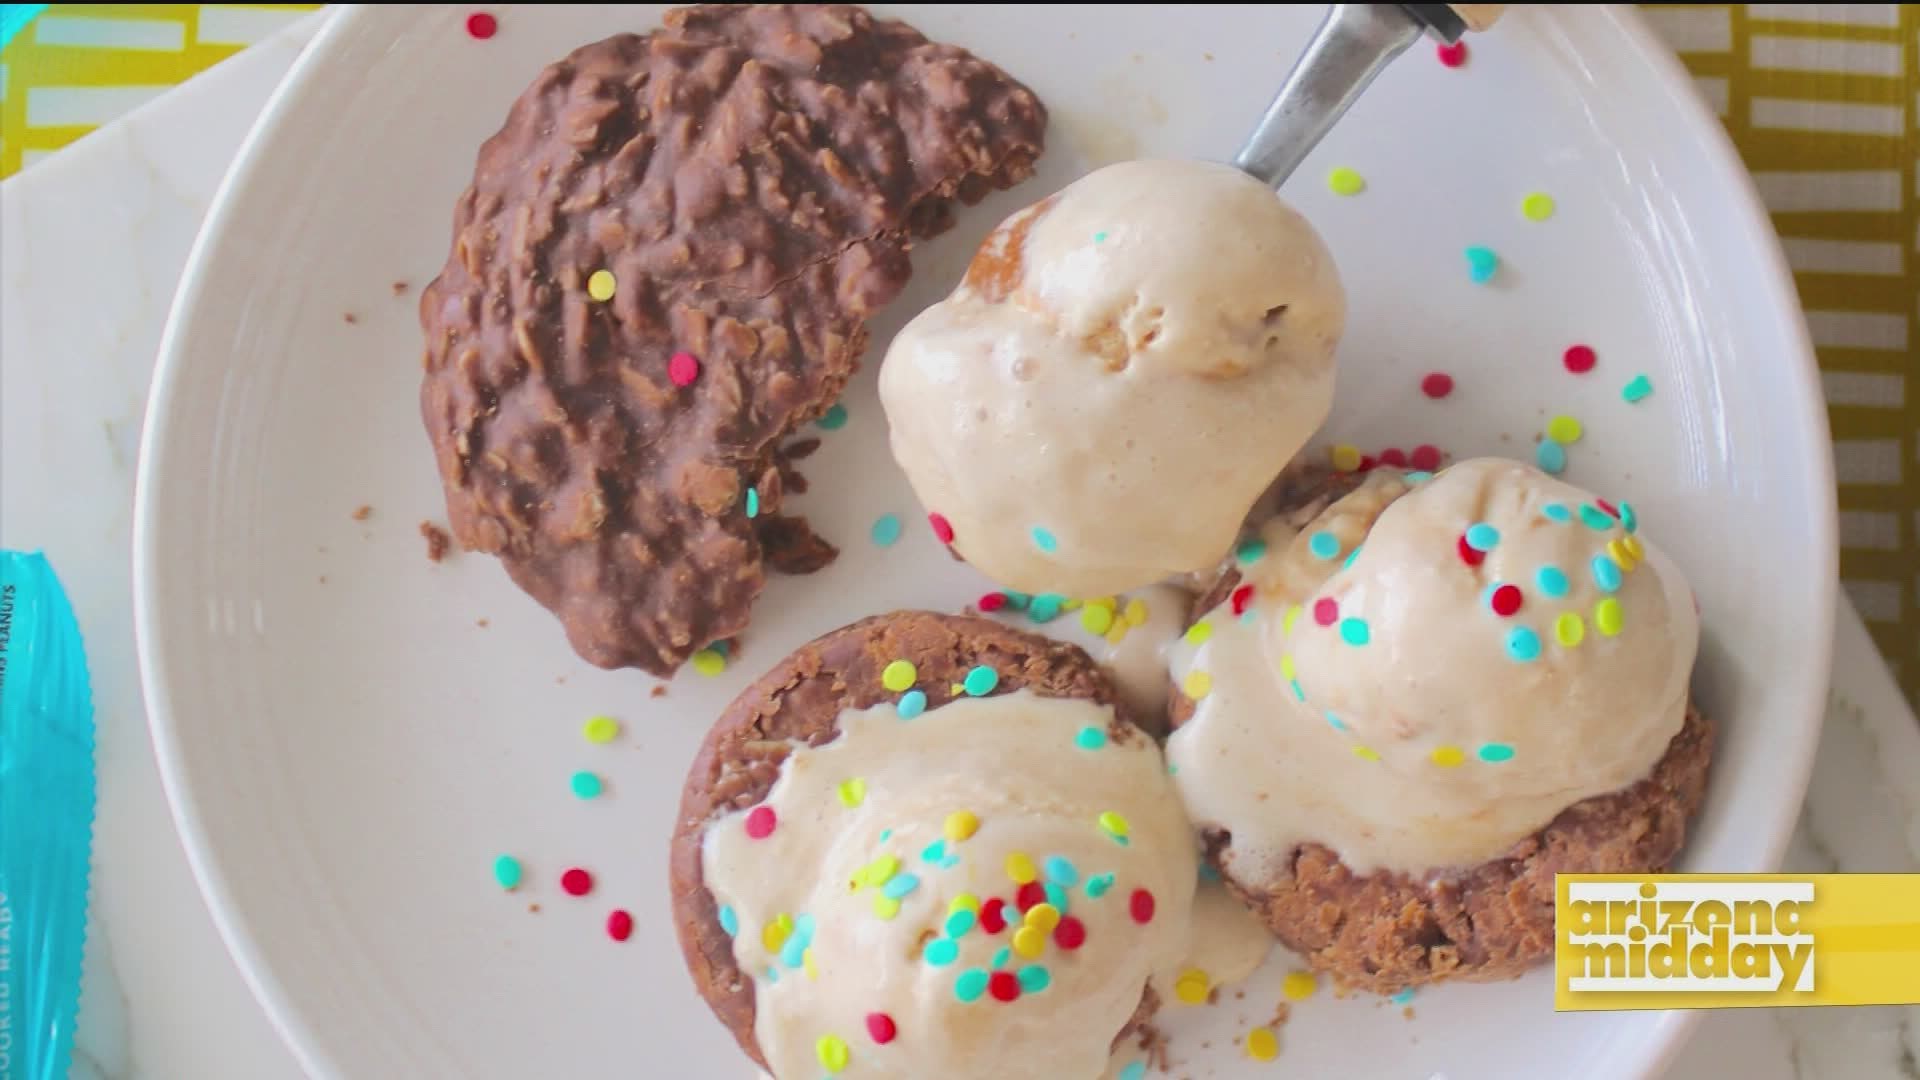 Donnelly Ditzhazy with No-Bake Cookie Co shows us how to create an easy summer treat to cool down with